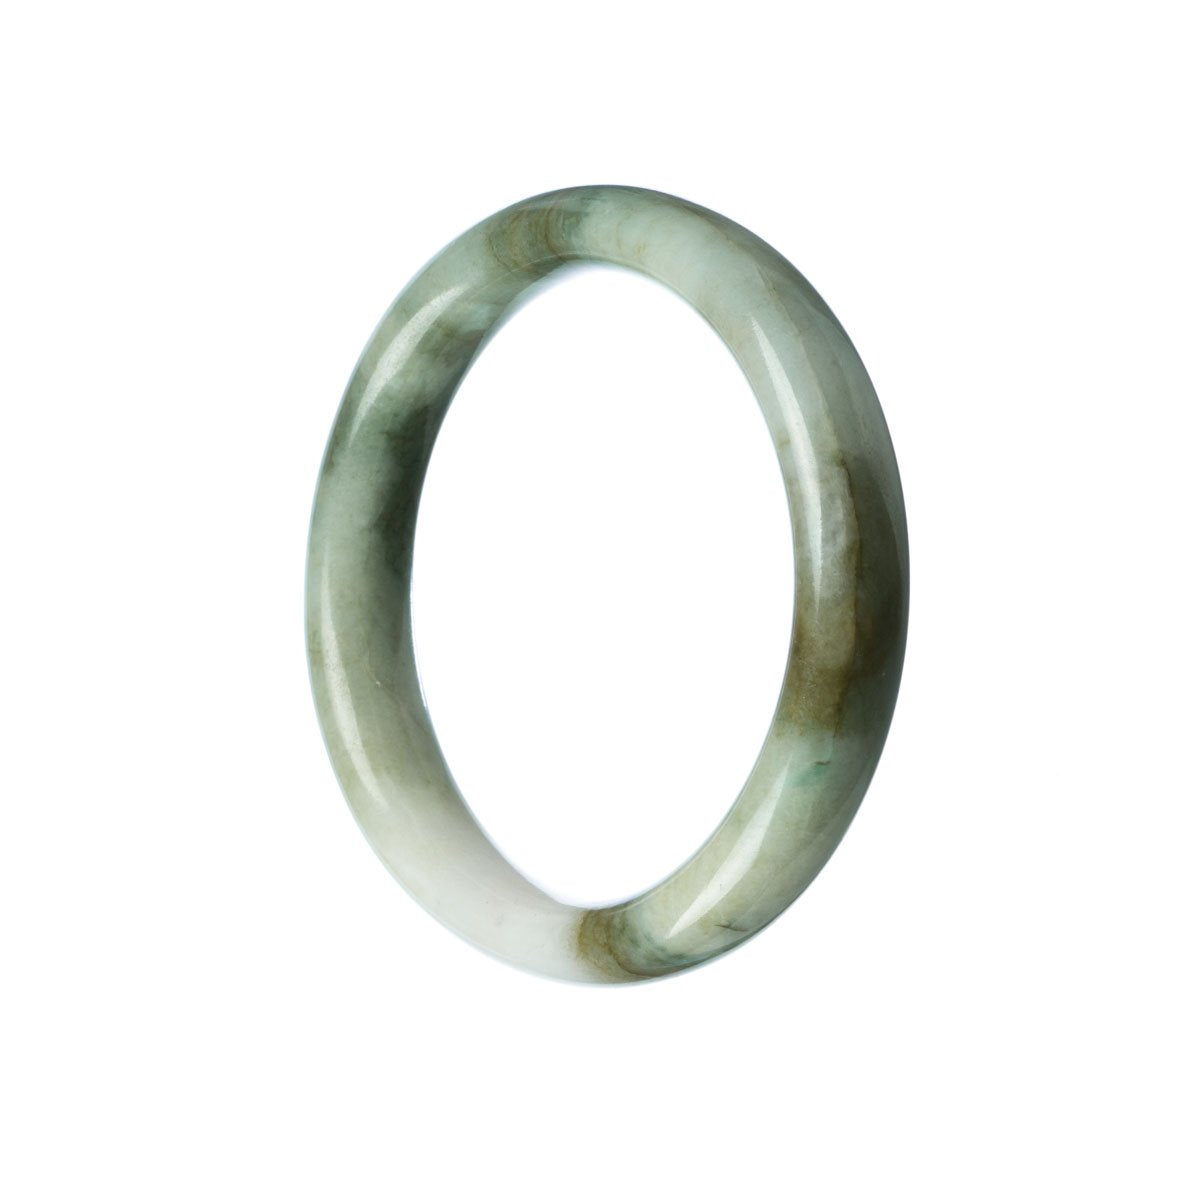 A close-up of an elegant white and green jade bangle bracelet, with a semi-round shape and a diameter of 56mm. Expertly crafted, this authentic Type A jade piece from MAYS GEMS exudes timeless beauty and sophistication.